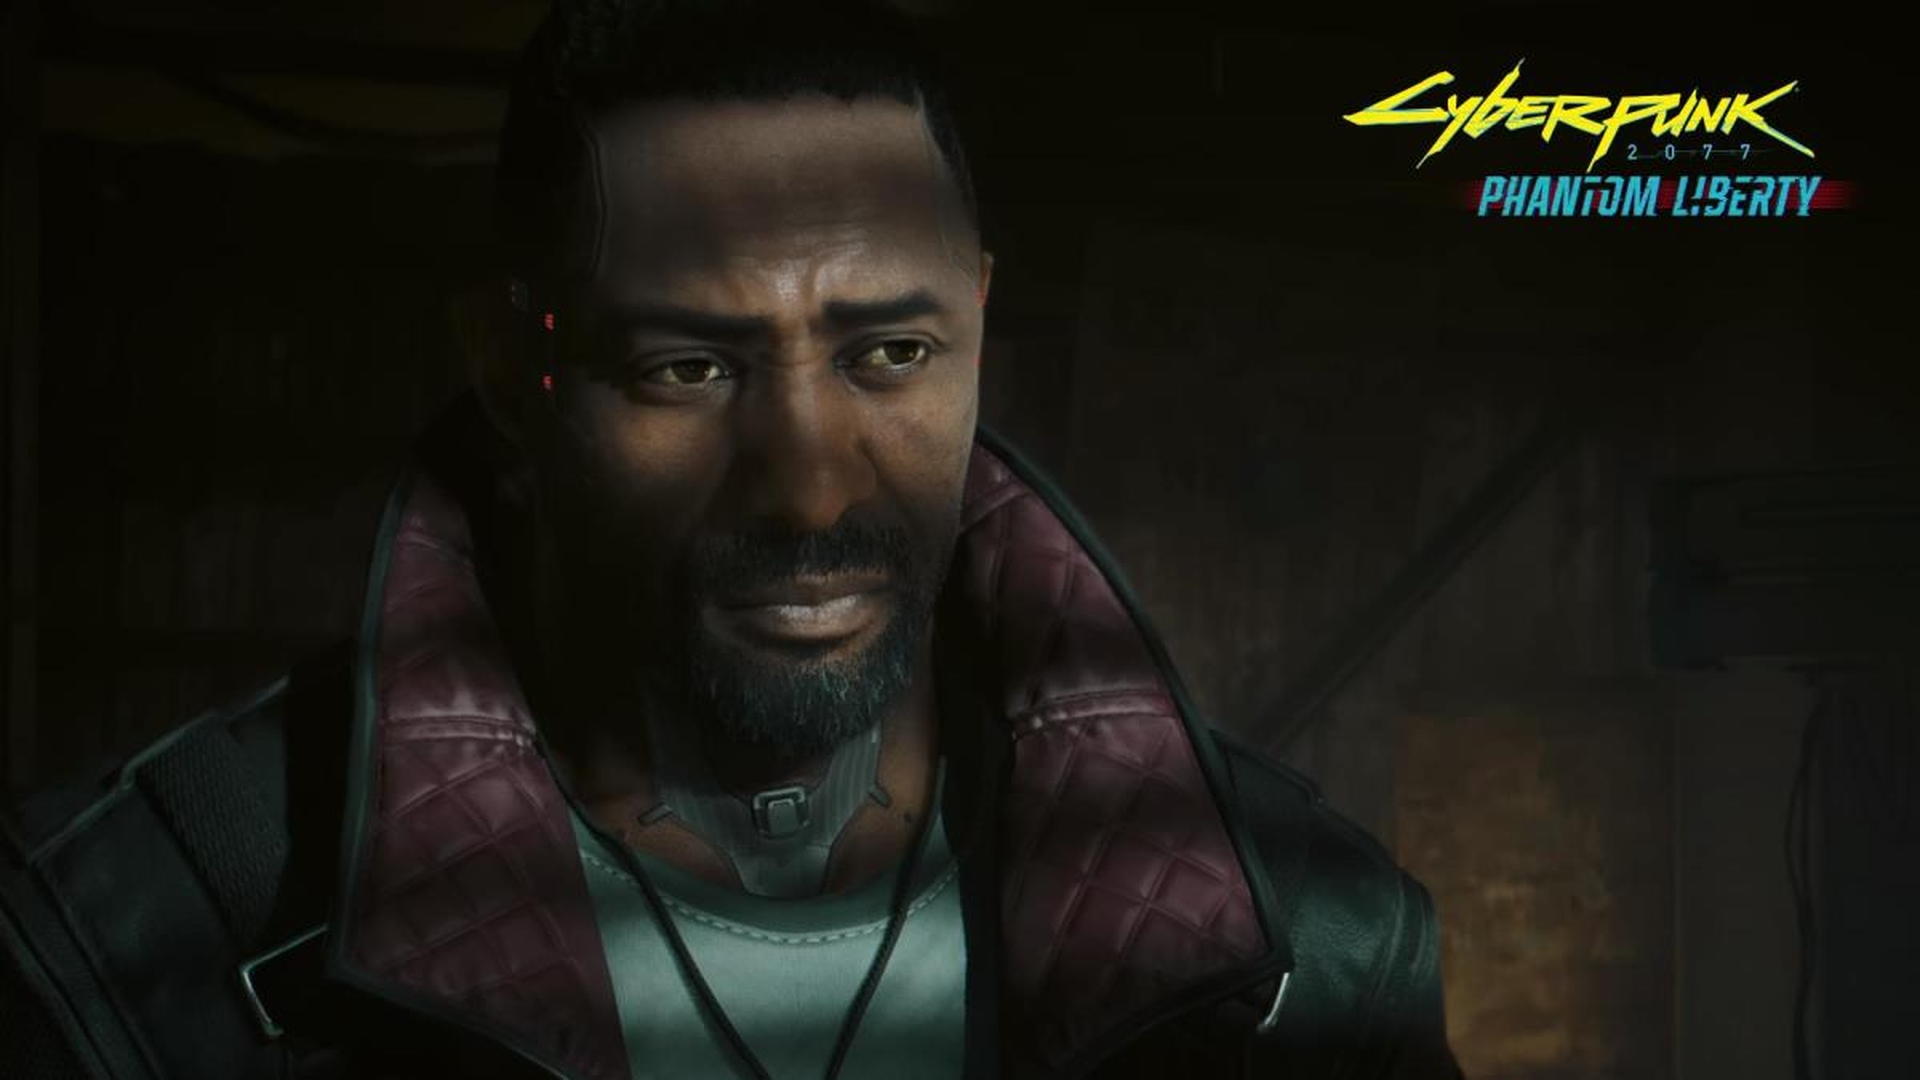 Idris Elba Cyberpunk 2077 Phantom Liberty character has just been revealed and fans will be running into him in-game as a character named Solomon Reed.